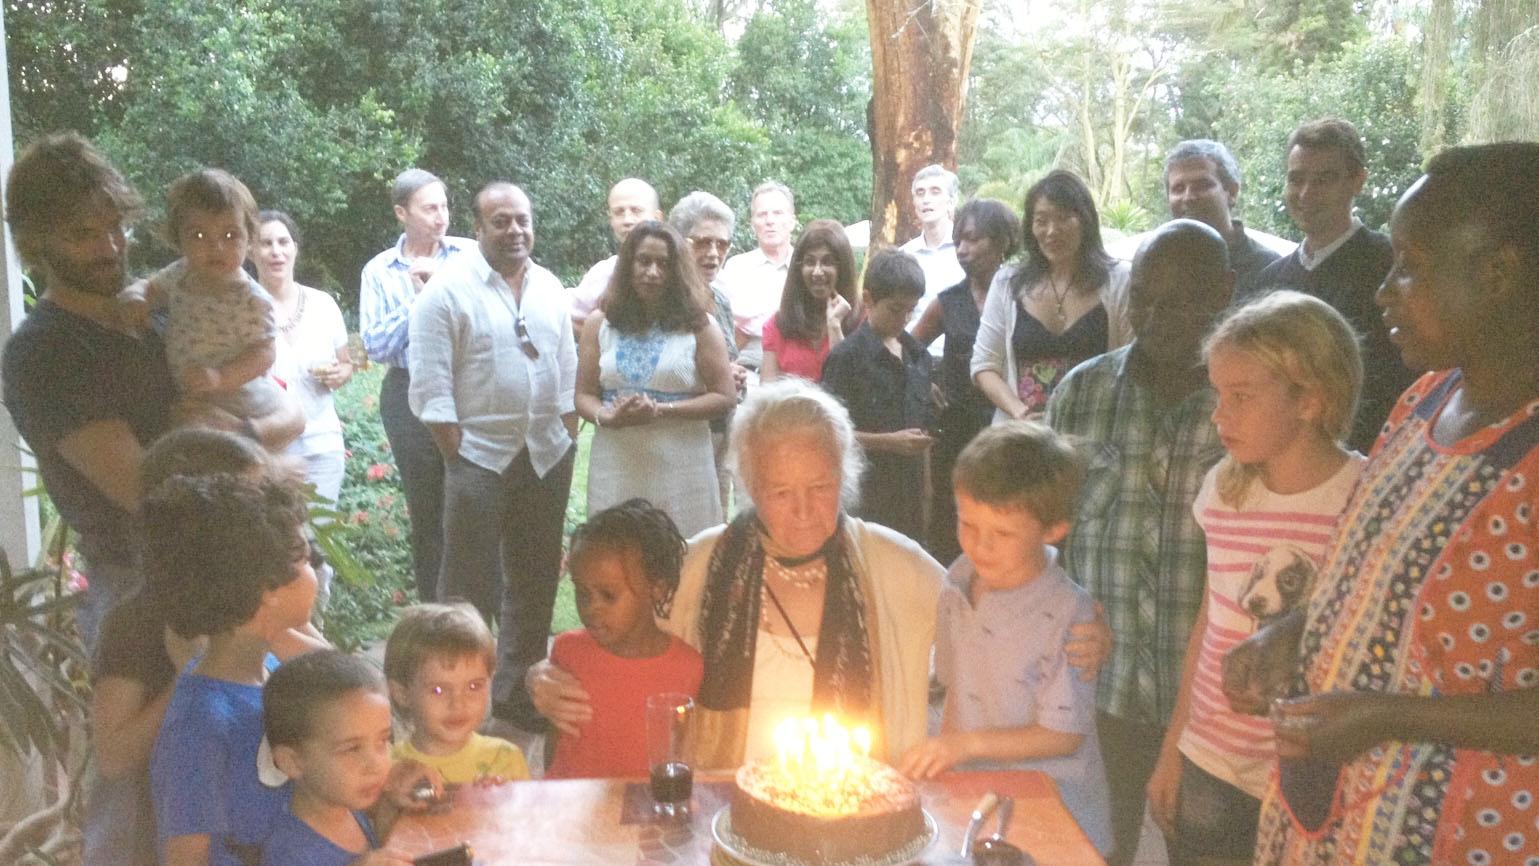 The author's mother celebrates her 93rd birthday in Kenya